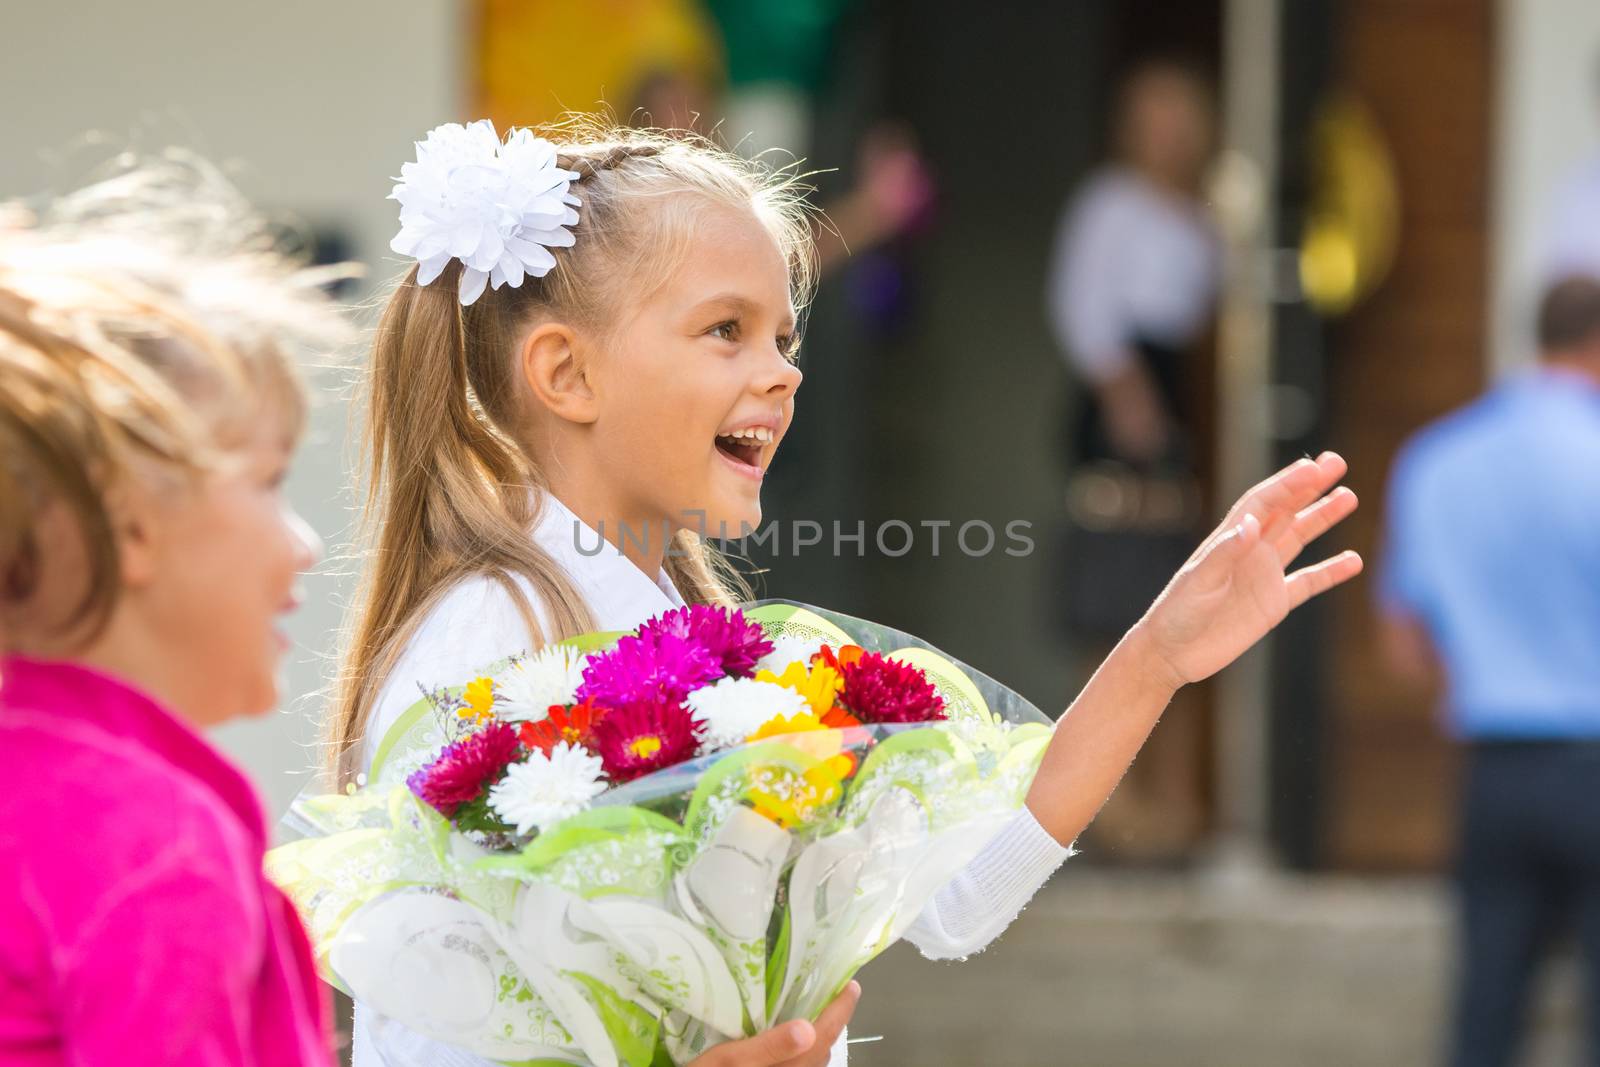 First-grader at the school the first of September in greeting waving his girlfriend